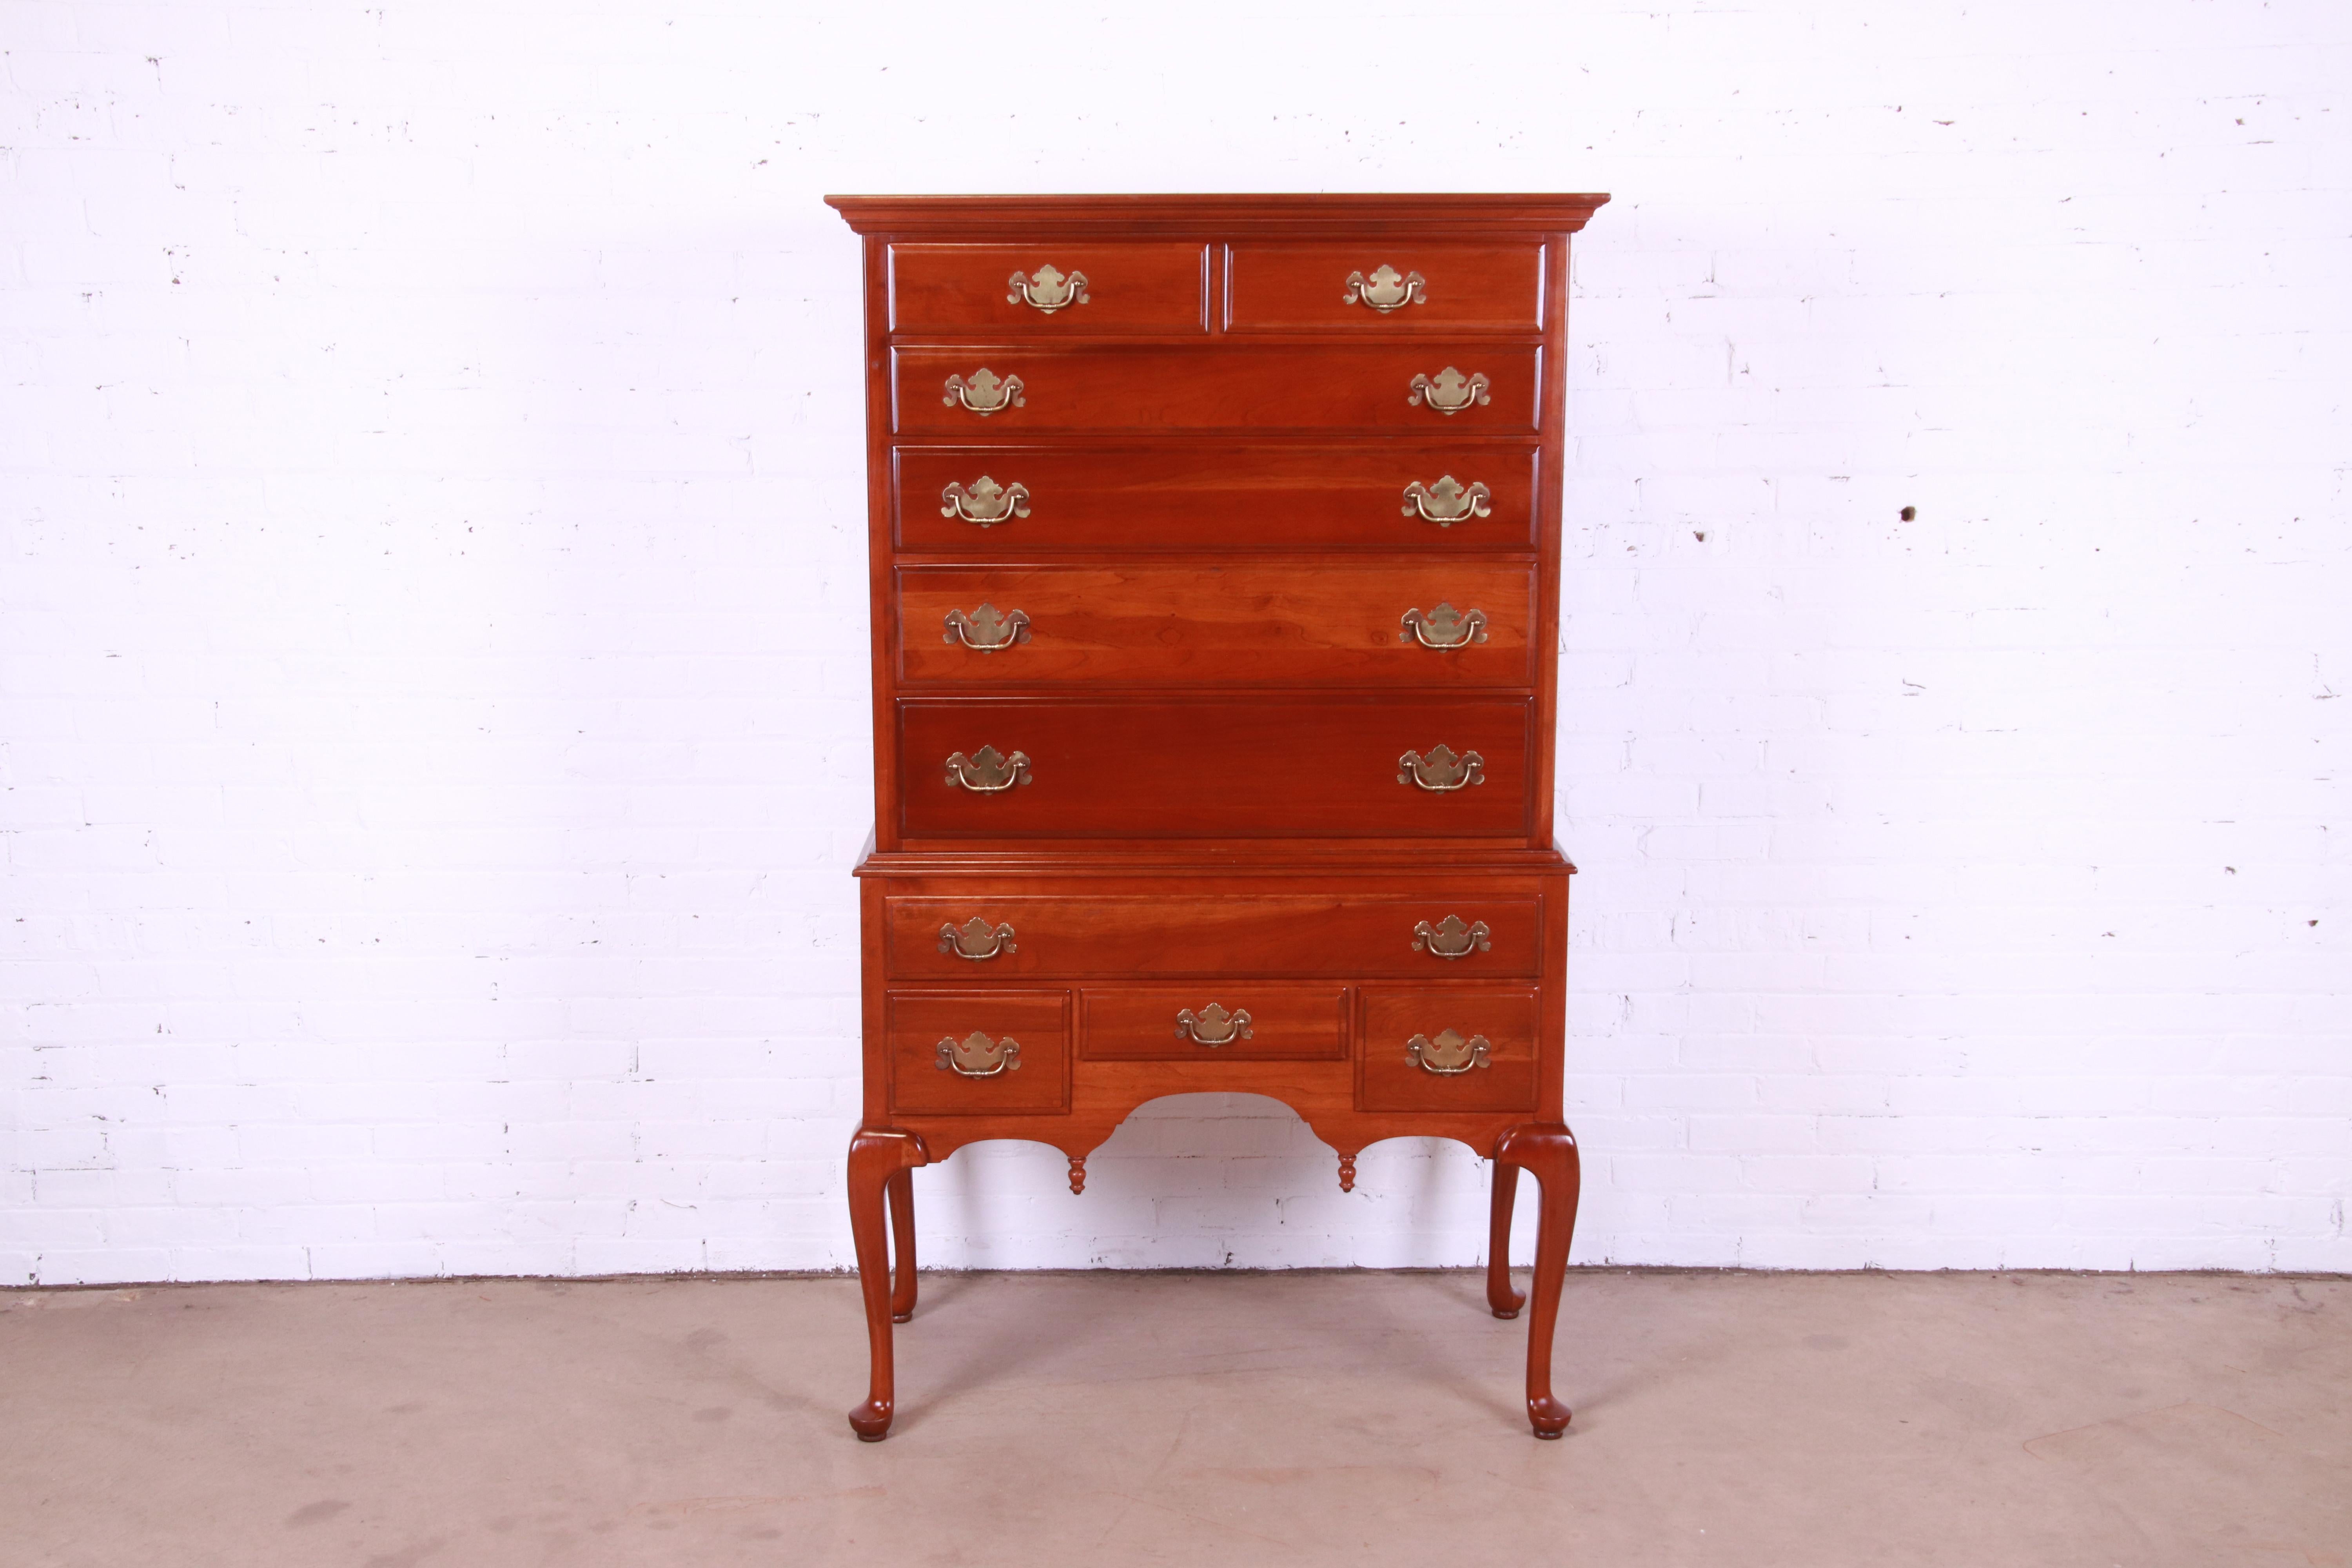 A gorgeous Queen Anne style ten-drawer highboy dresser chest.

USA, Mid-20th Century

Solid cherry wood, with original brass hardware.

Measures: 40